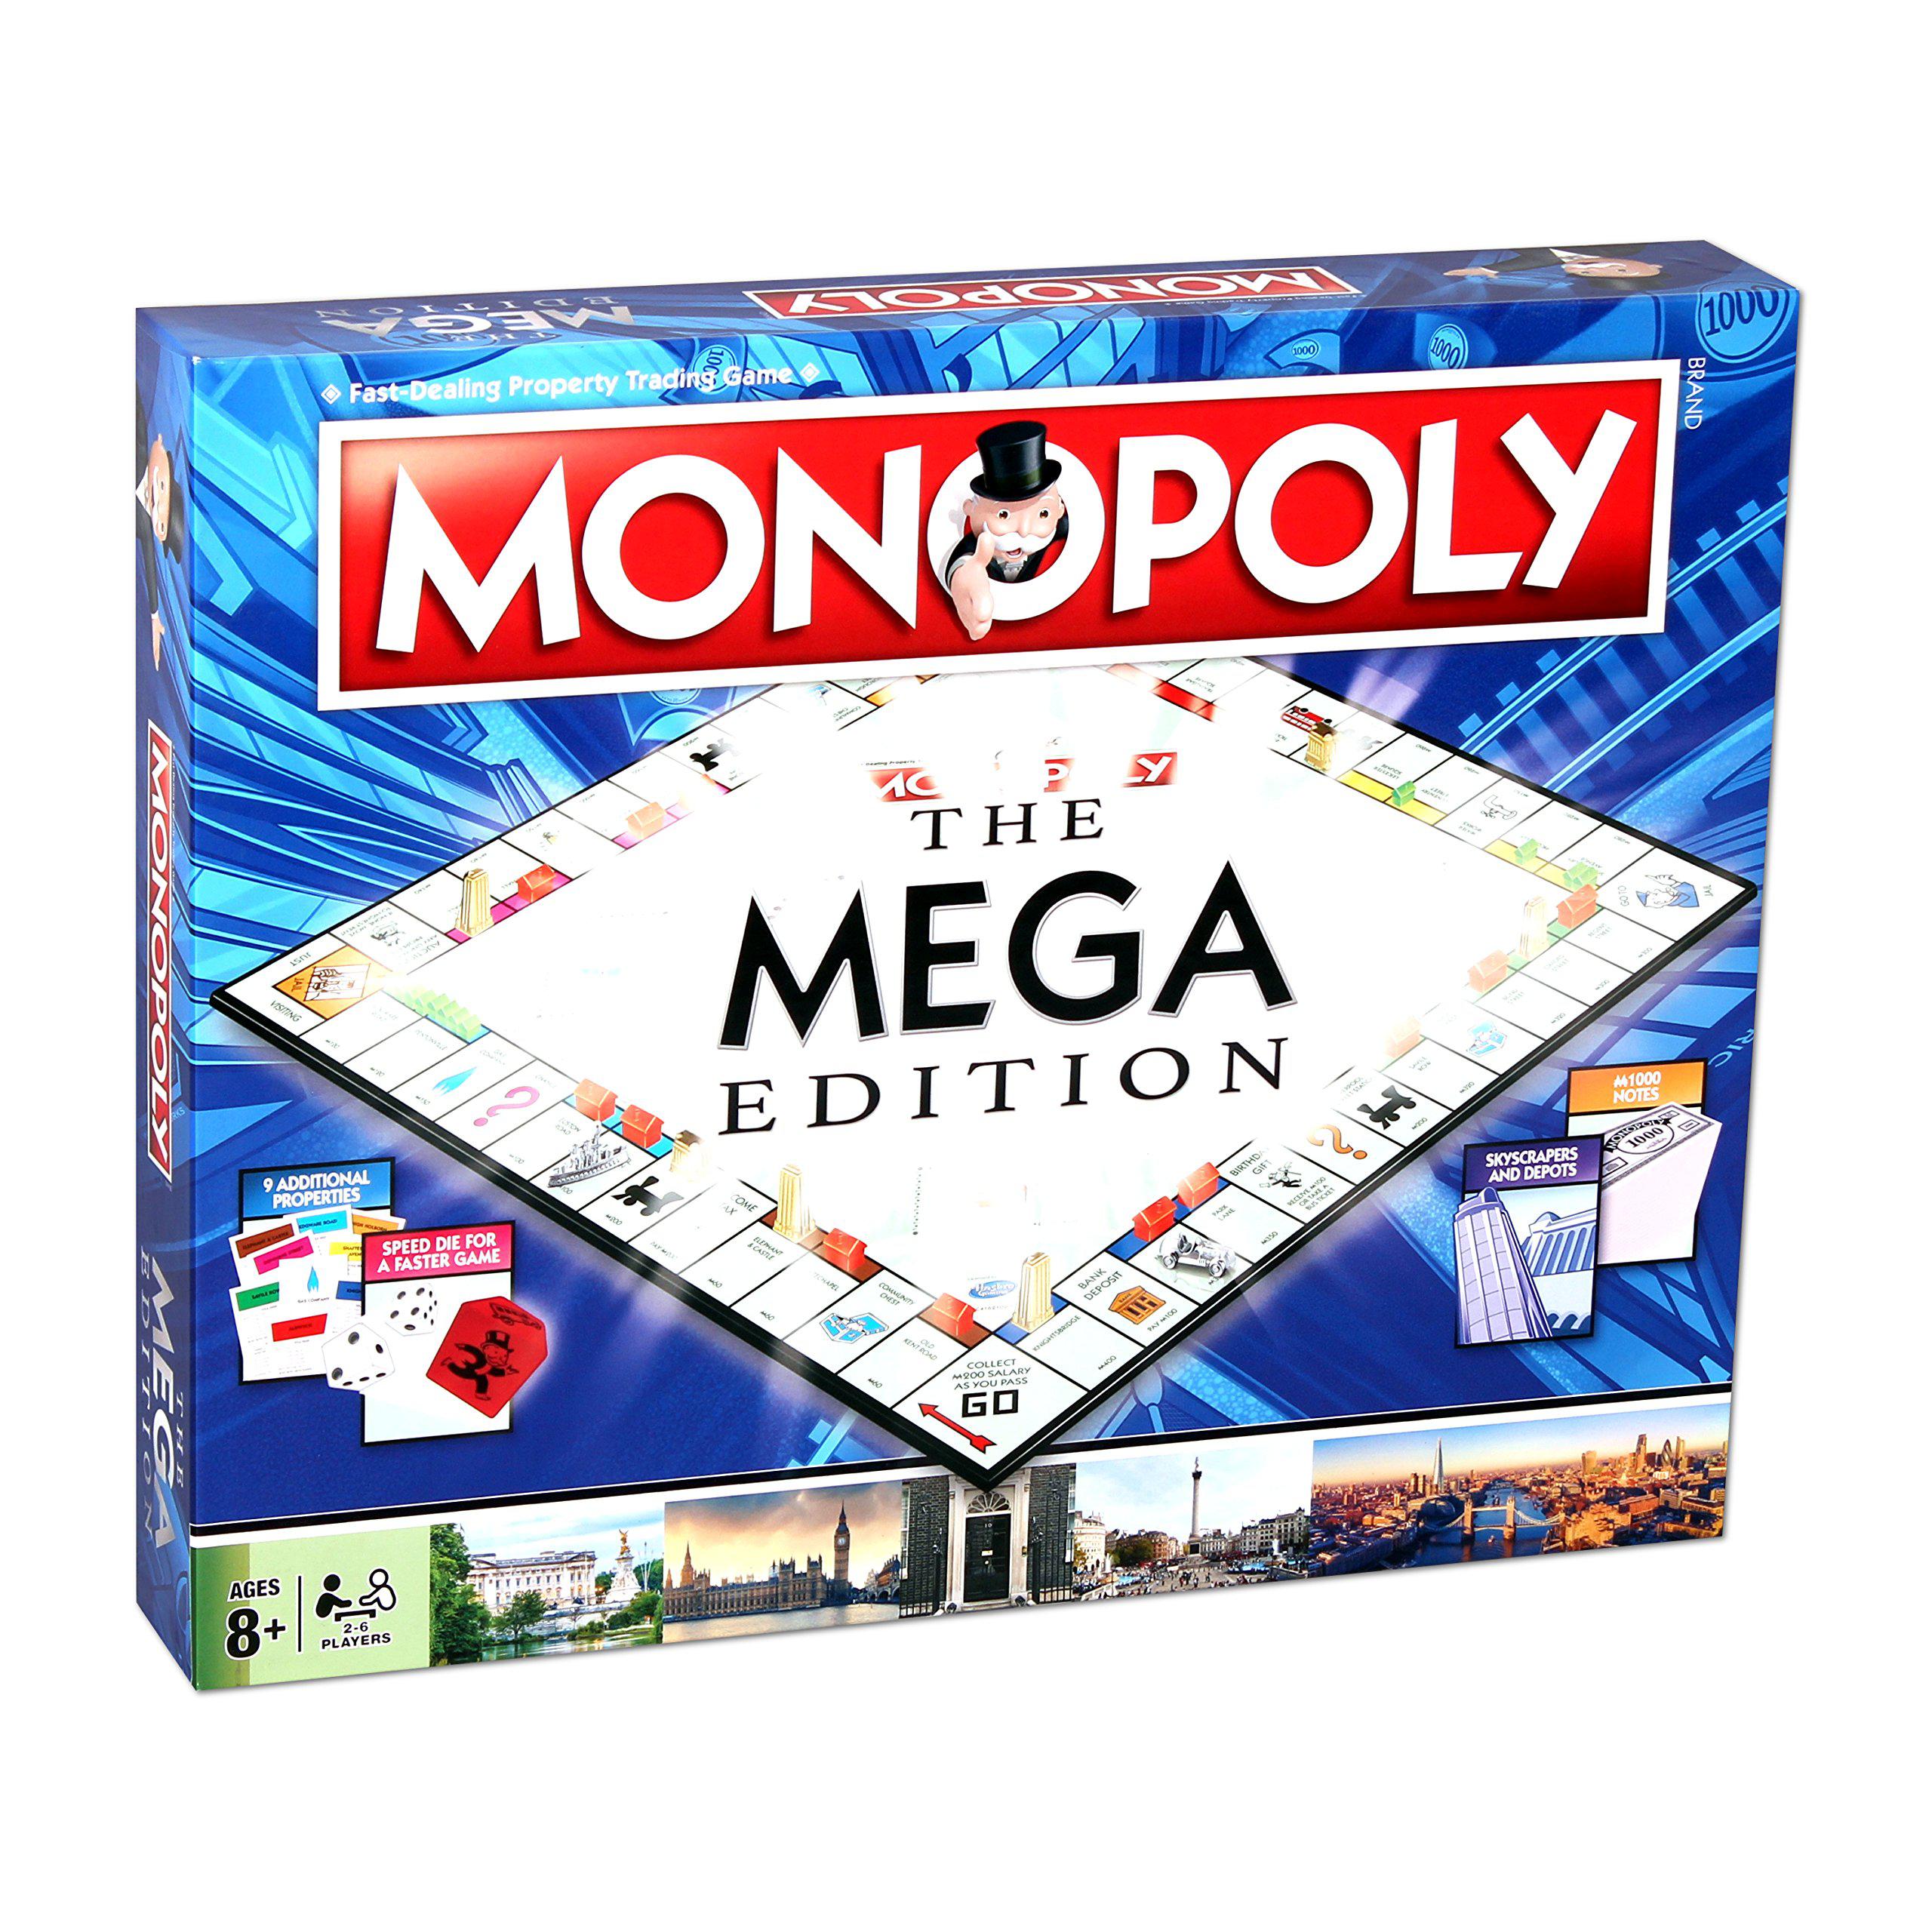 Winning Moves Games winning moves mega monopoly board game, an upgrade on the classic game board with 12 extra spaces including downing street, s